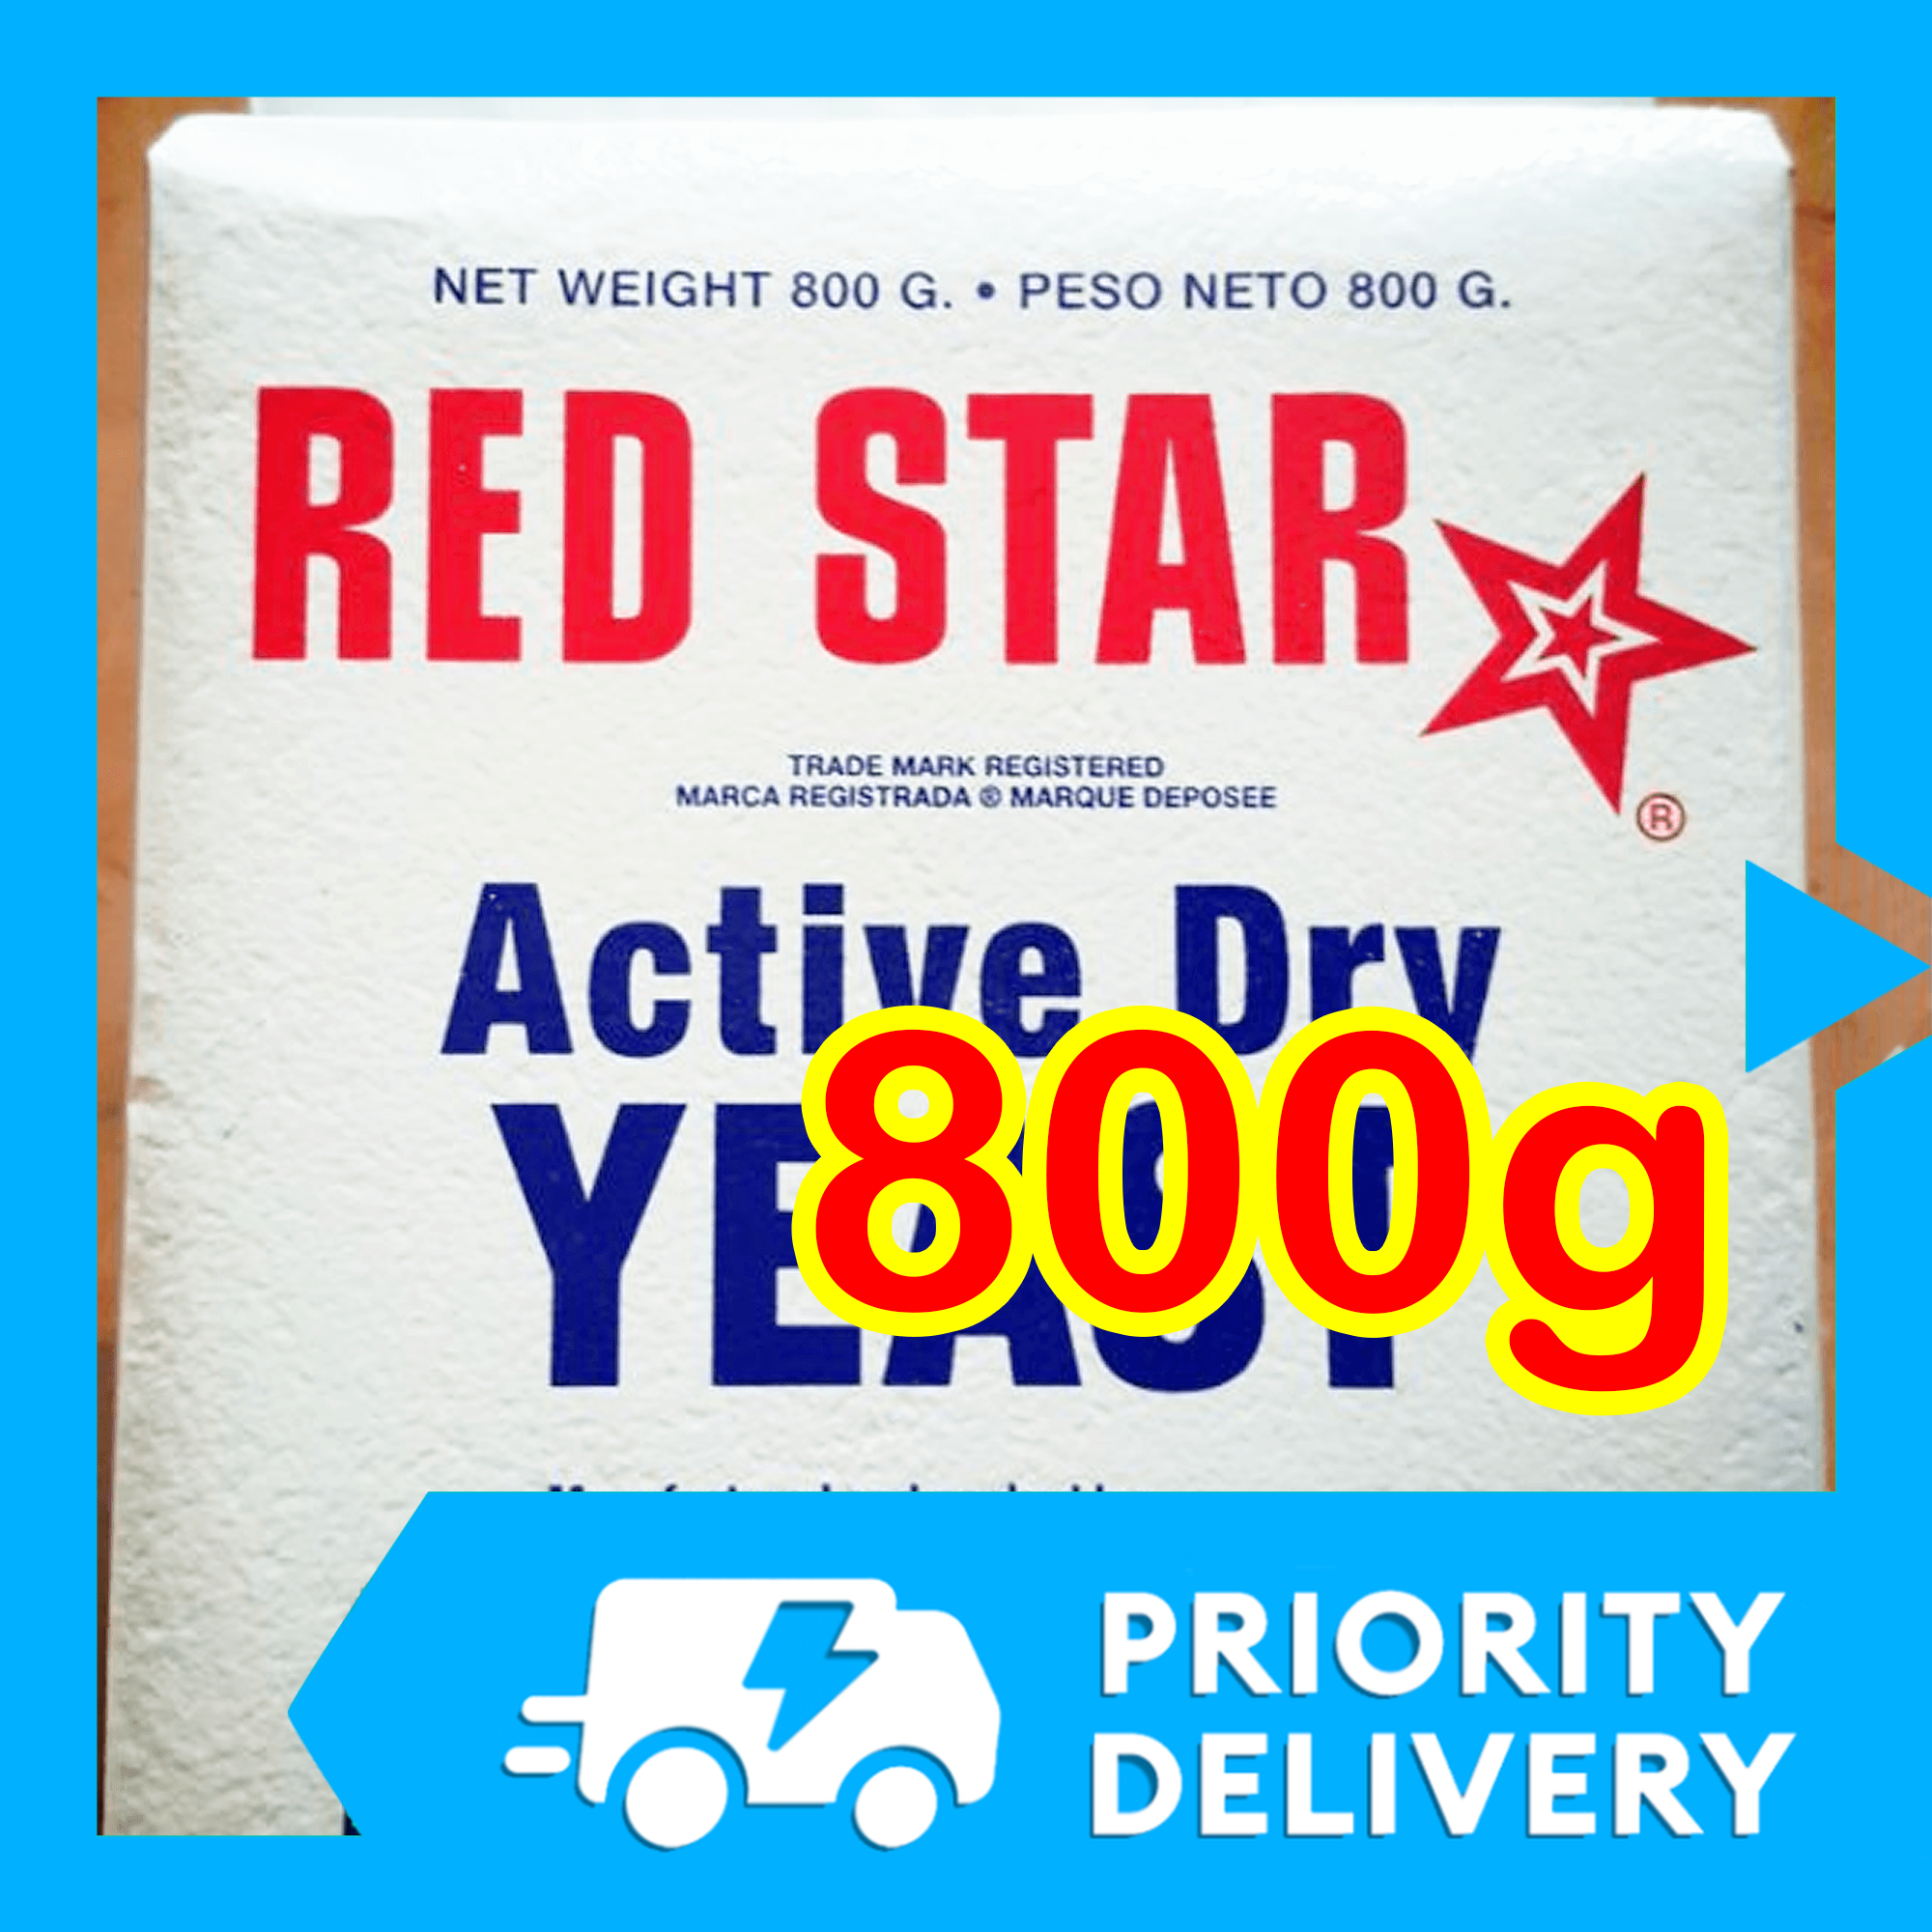 Red Star Active Dry Yeast for Baking Bread